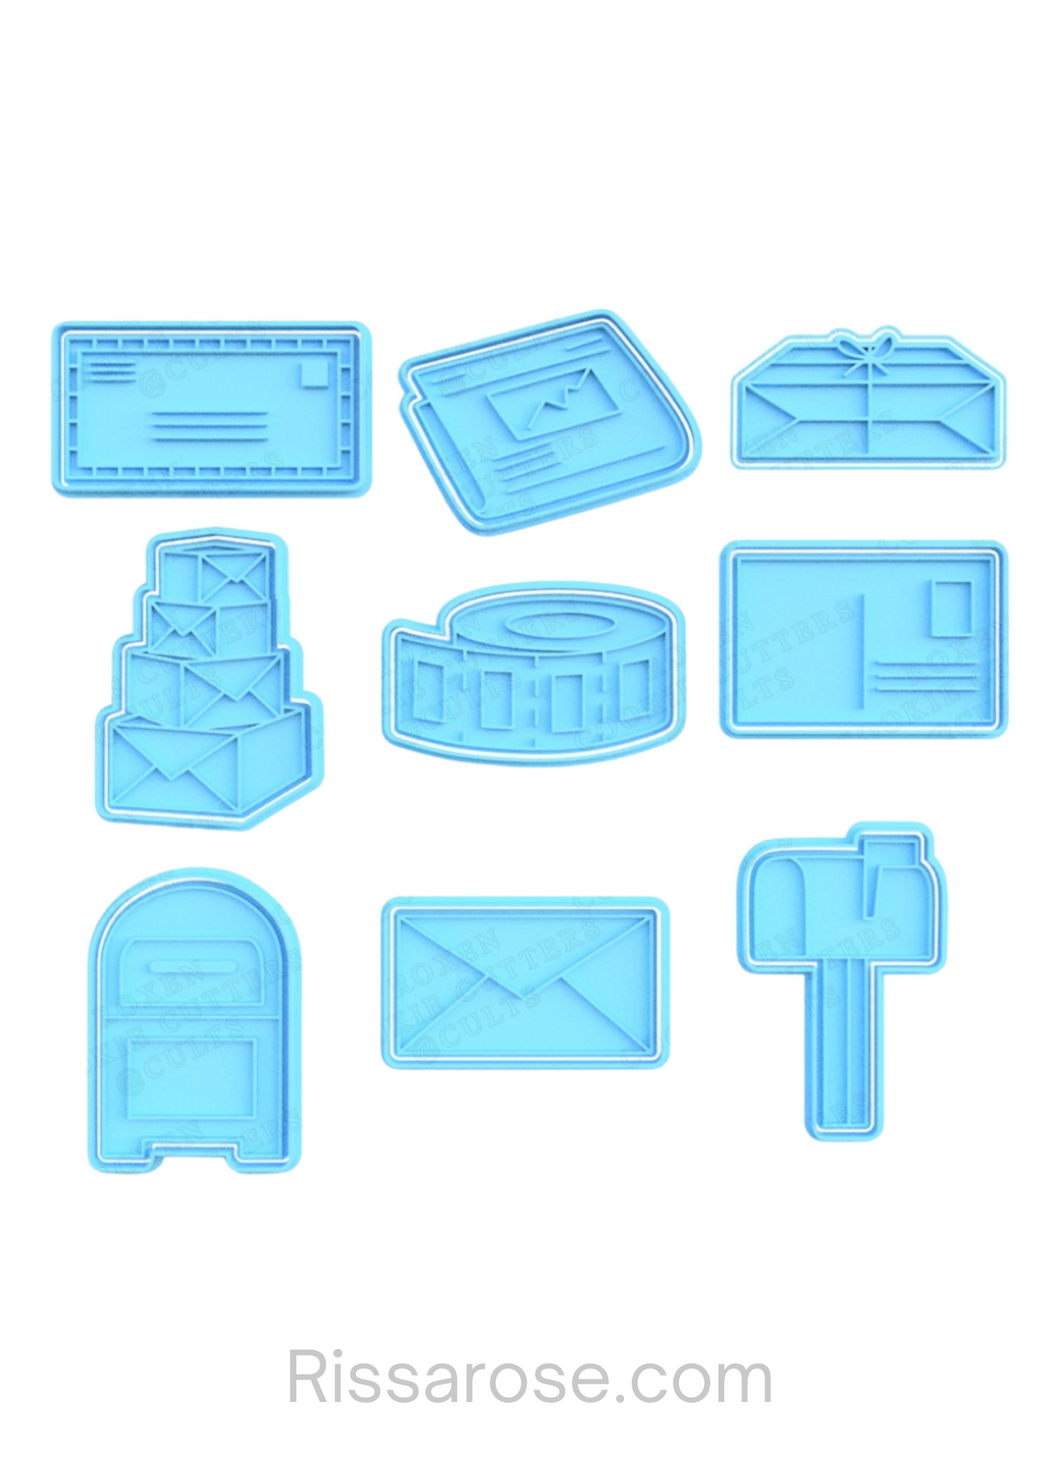 Post Office Theme Cookie Cutter Stamp Post Mail Newspaper Package Parcels Tape Postcard Mail Post Letter Mailbox